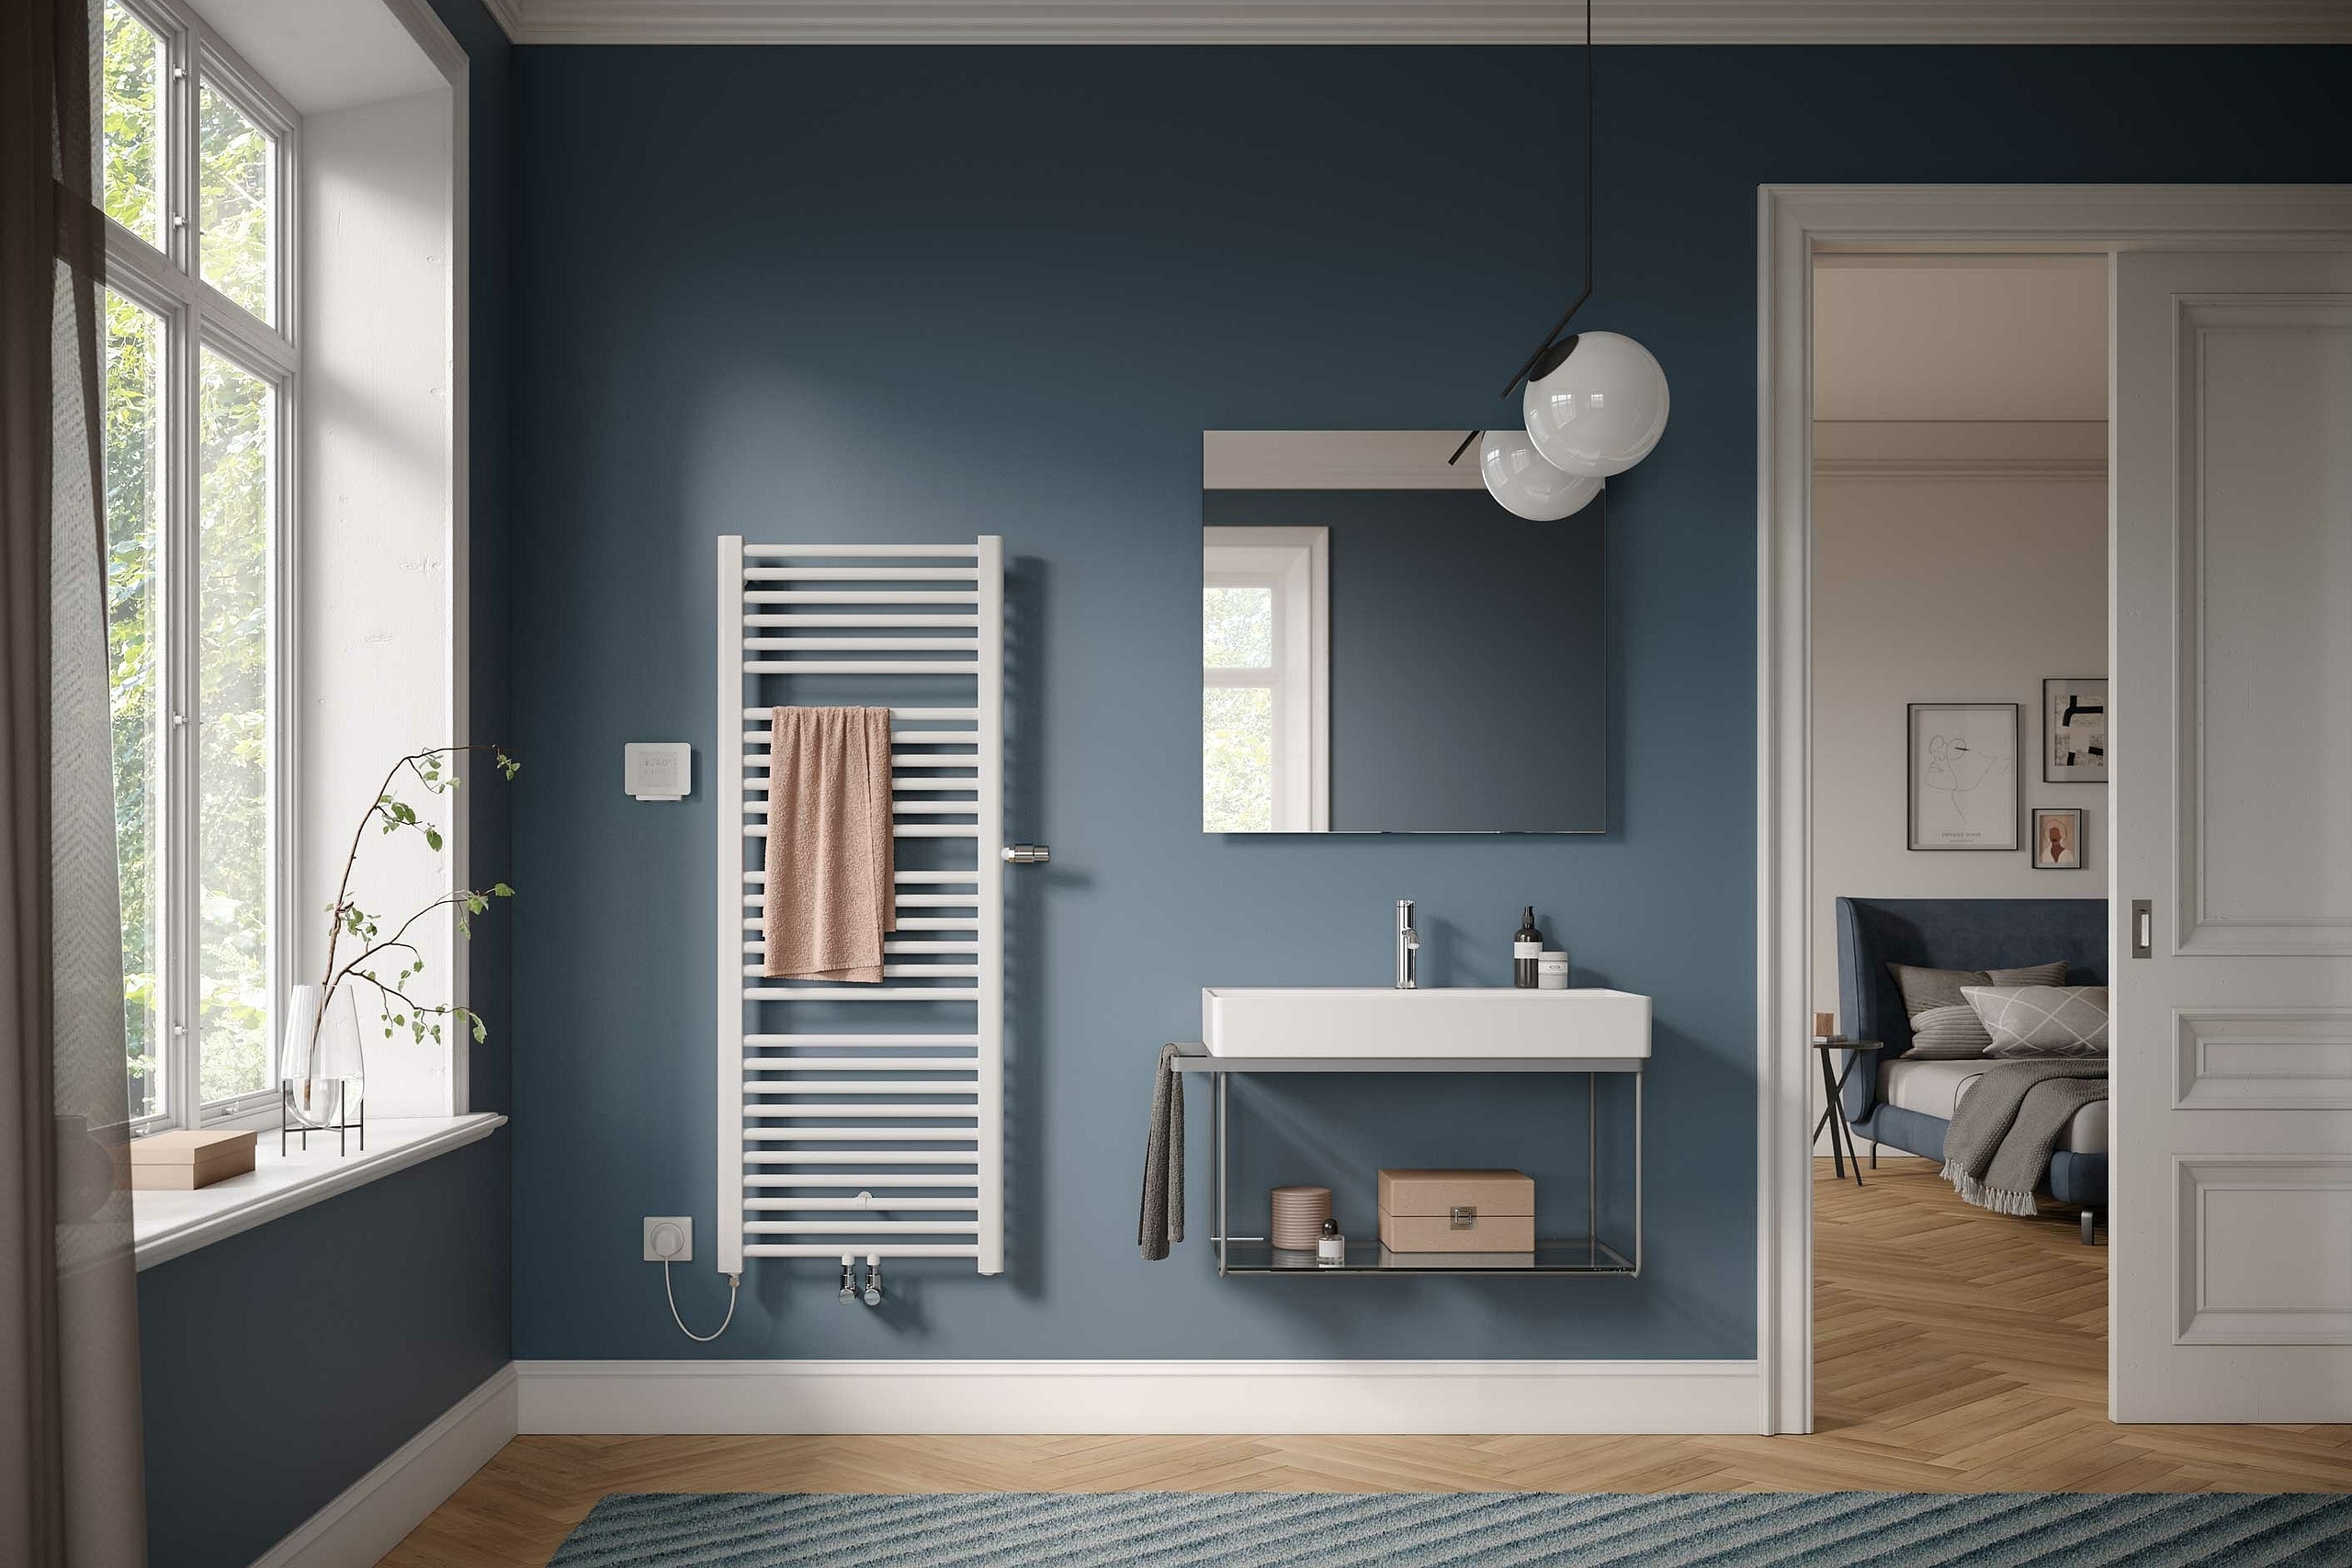 Kermi Basic plus design and bathroom radiators also available in an electric version.